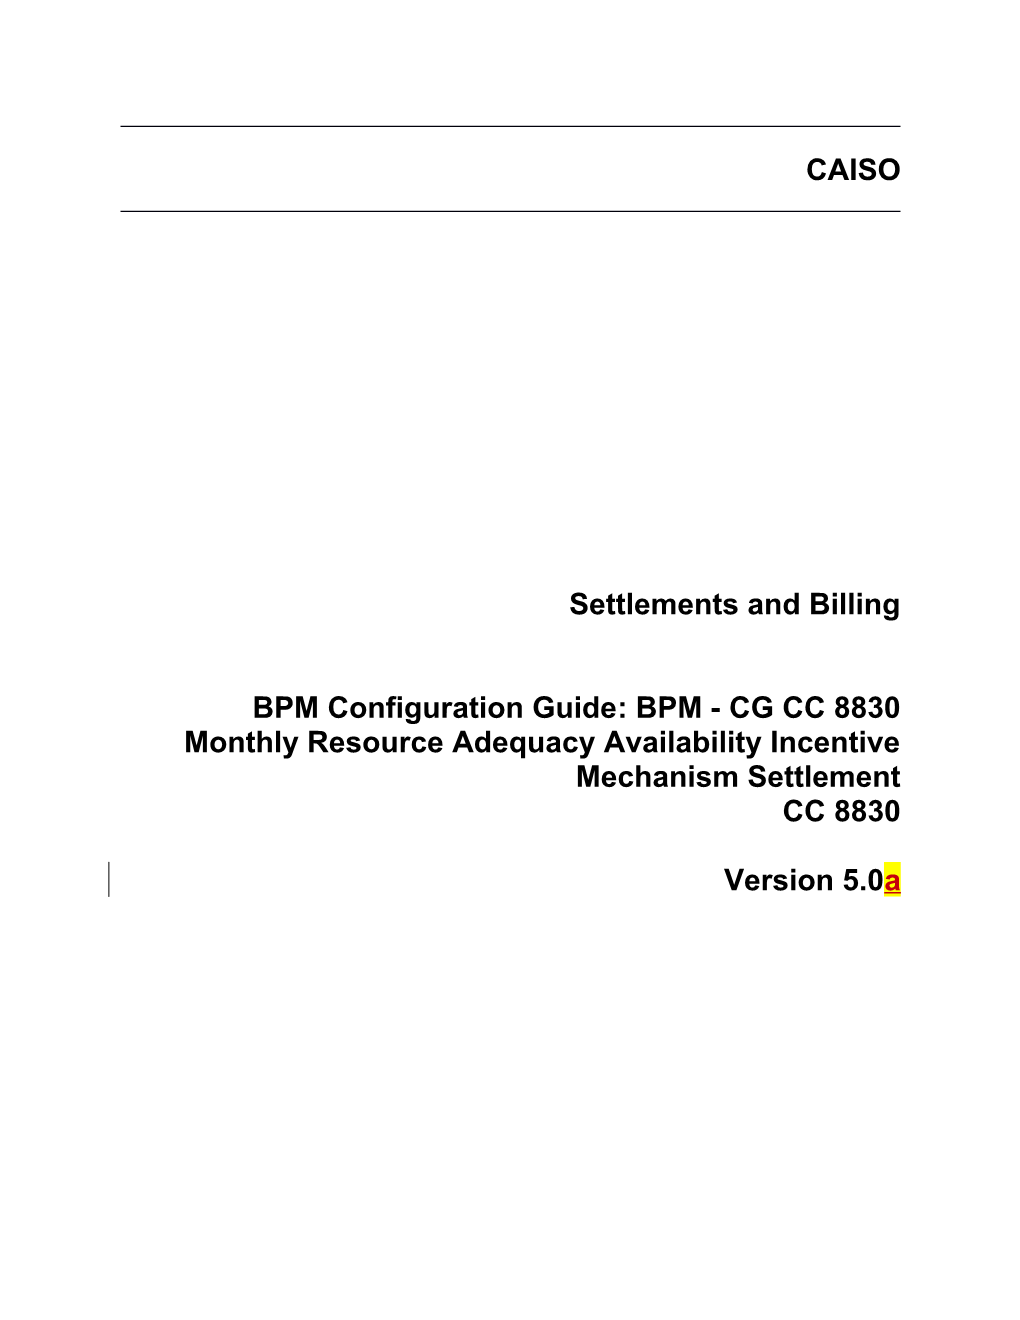 BPM - CG CC 8830 Monthly Resource Adequacy Availability Incentive Mechanism Settlement